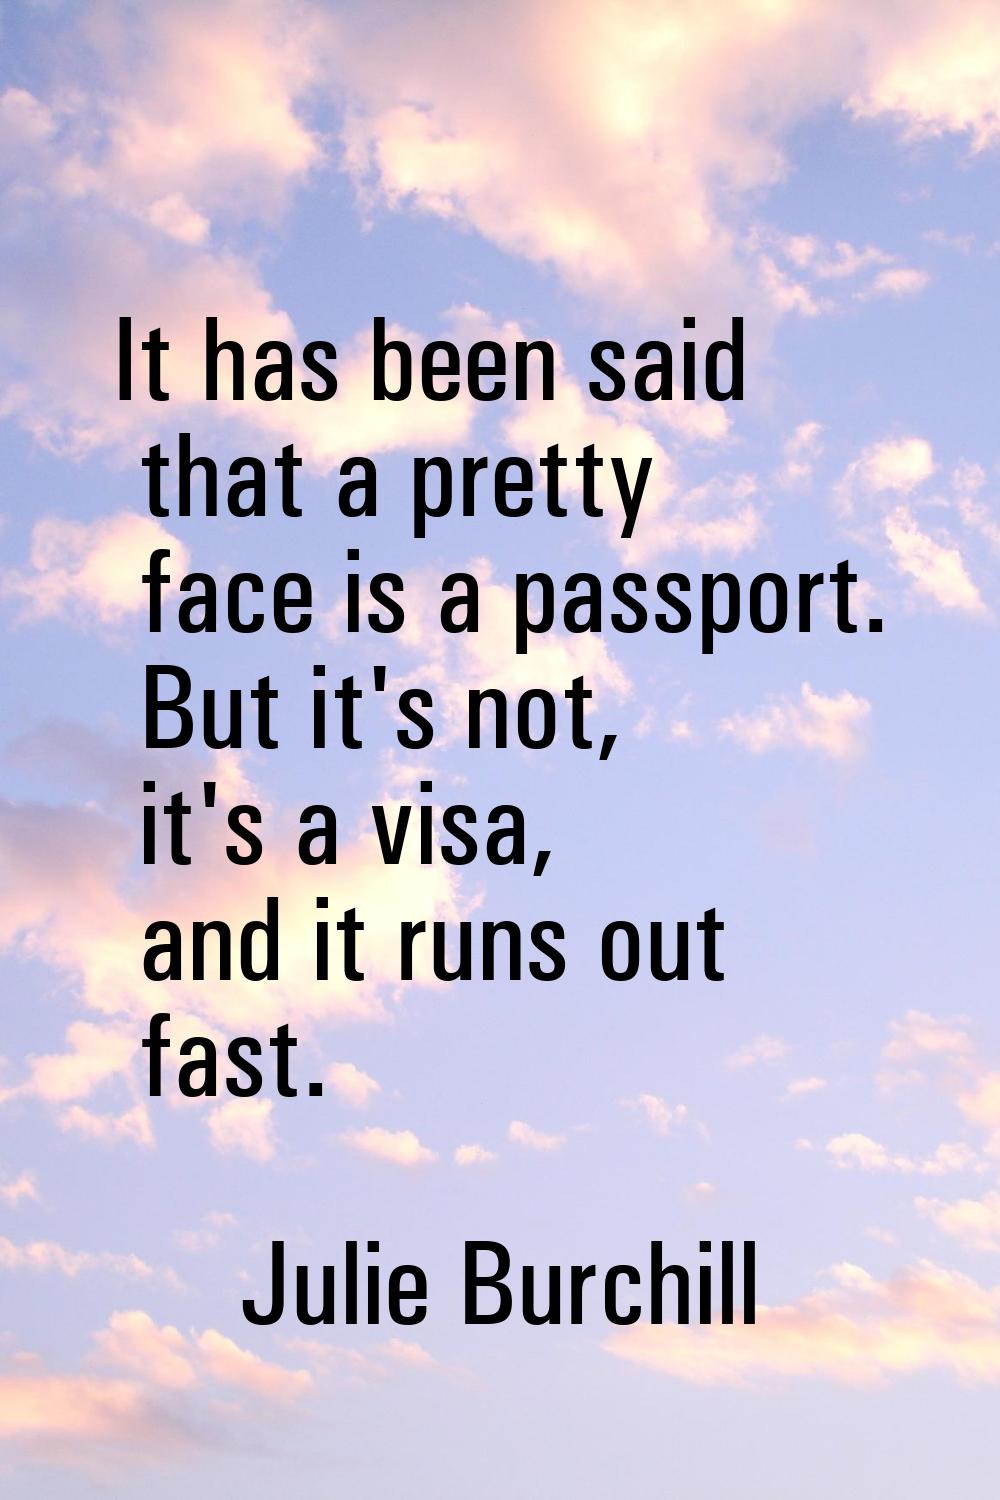 It has been said that a pretty face is a passport. But it's not, it's a visa, and it runs out fast.